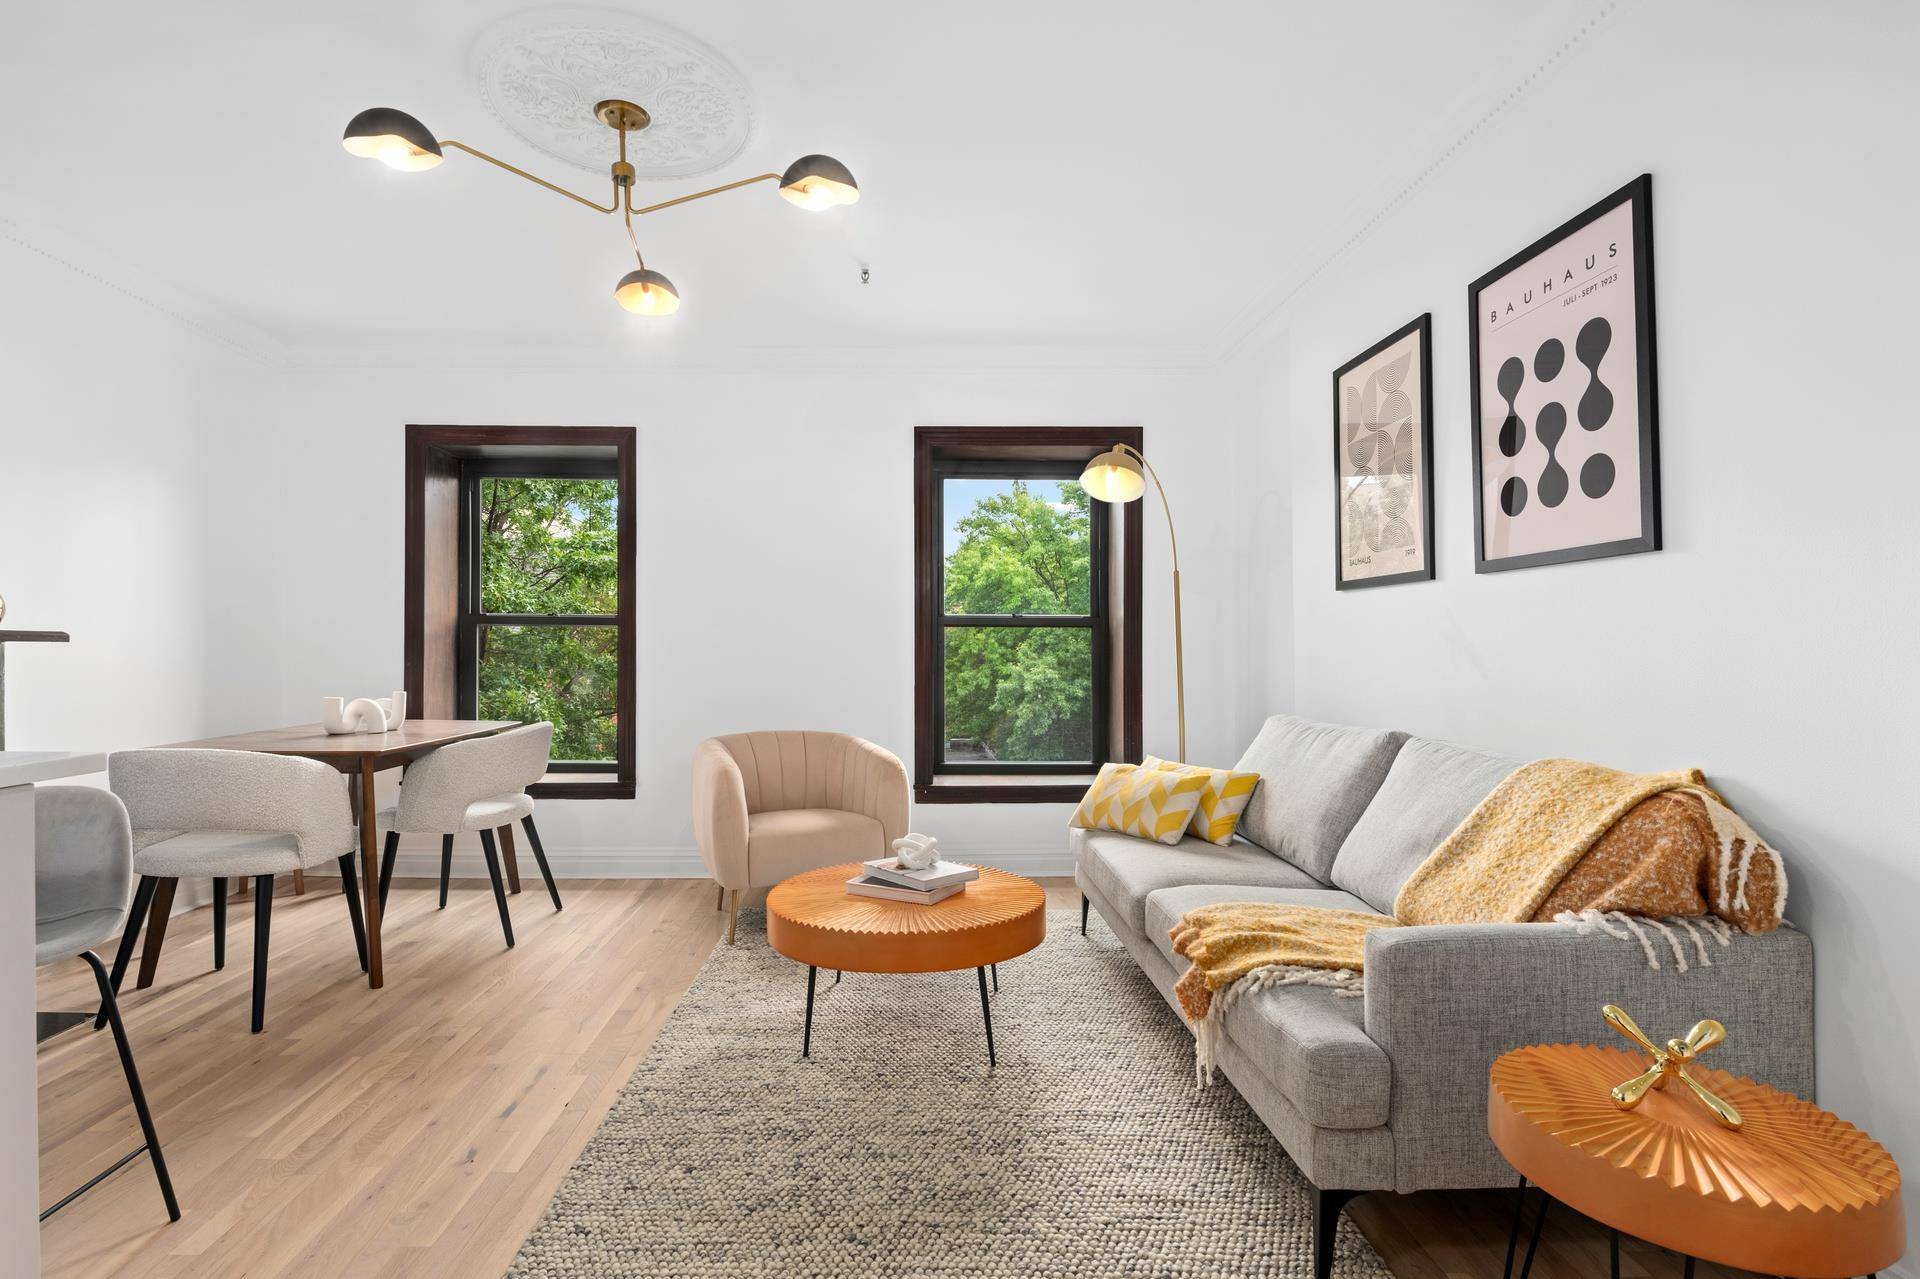 Immaculately renovated, 65 Gates Avenue offers modern luxury on one of Clinton Hill's best blocks.